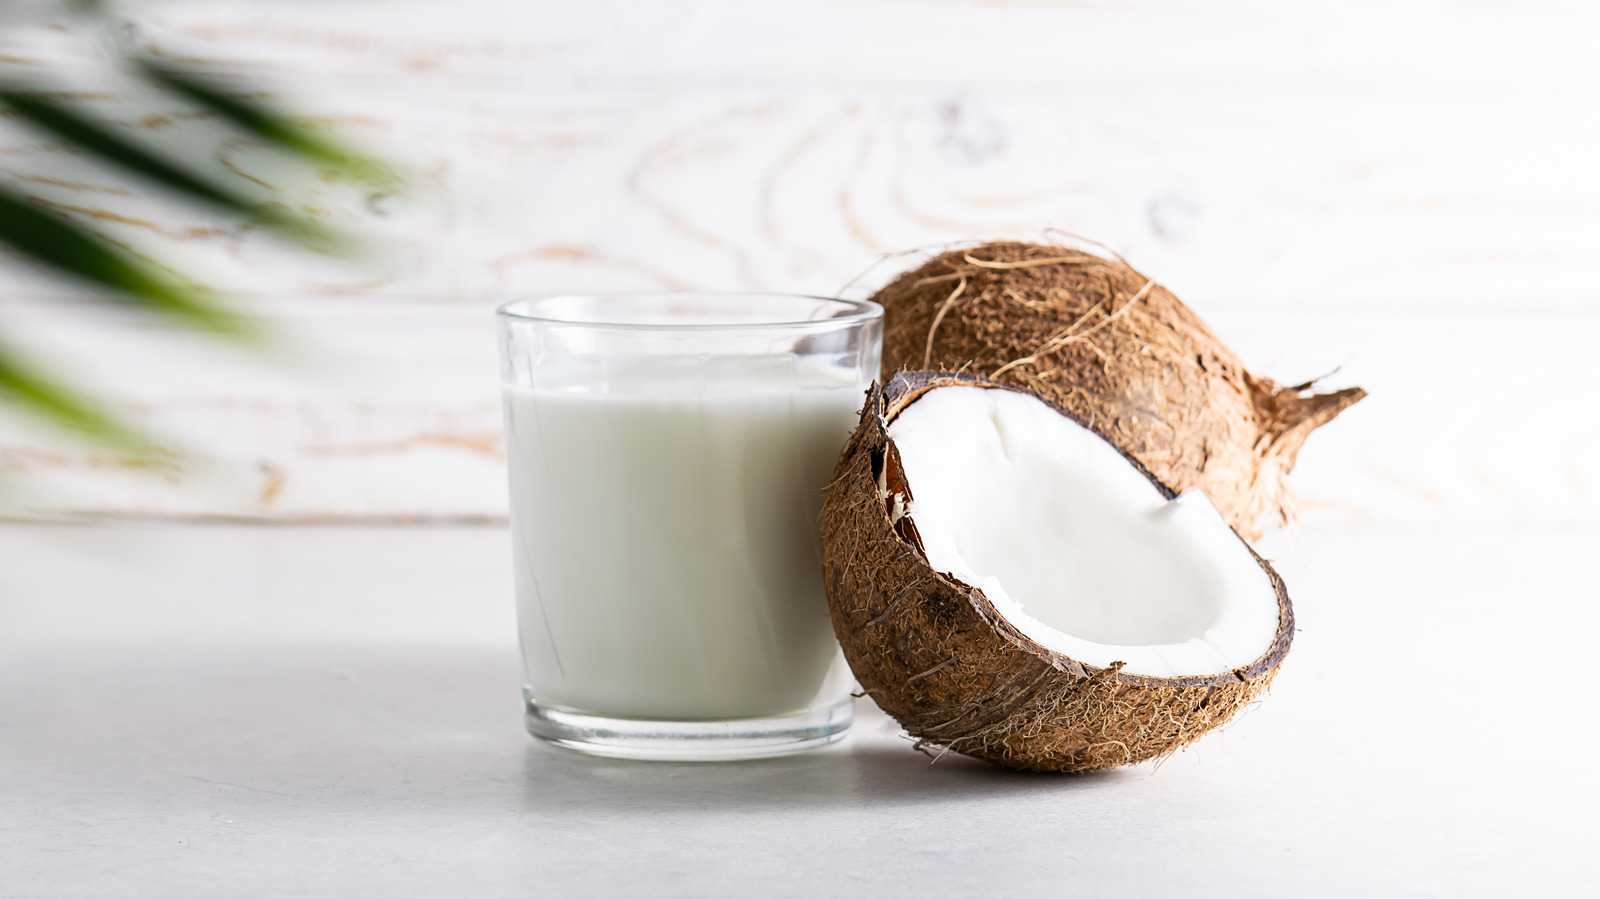 https://www.tastingtable.com/img/gallery/tips-you-need-when-cooking-with-coconut-milk/l-intro-1649704554.jpg